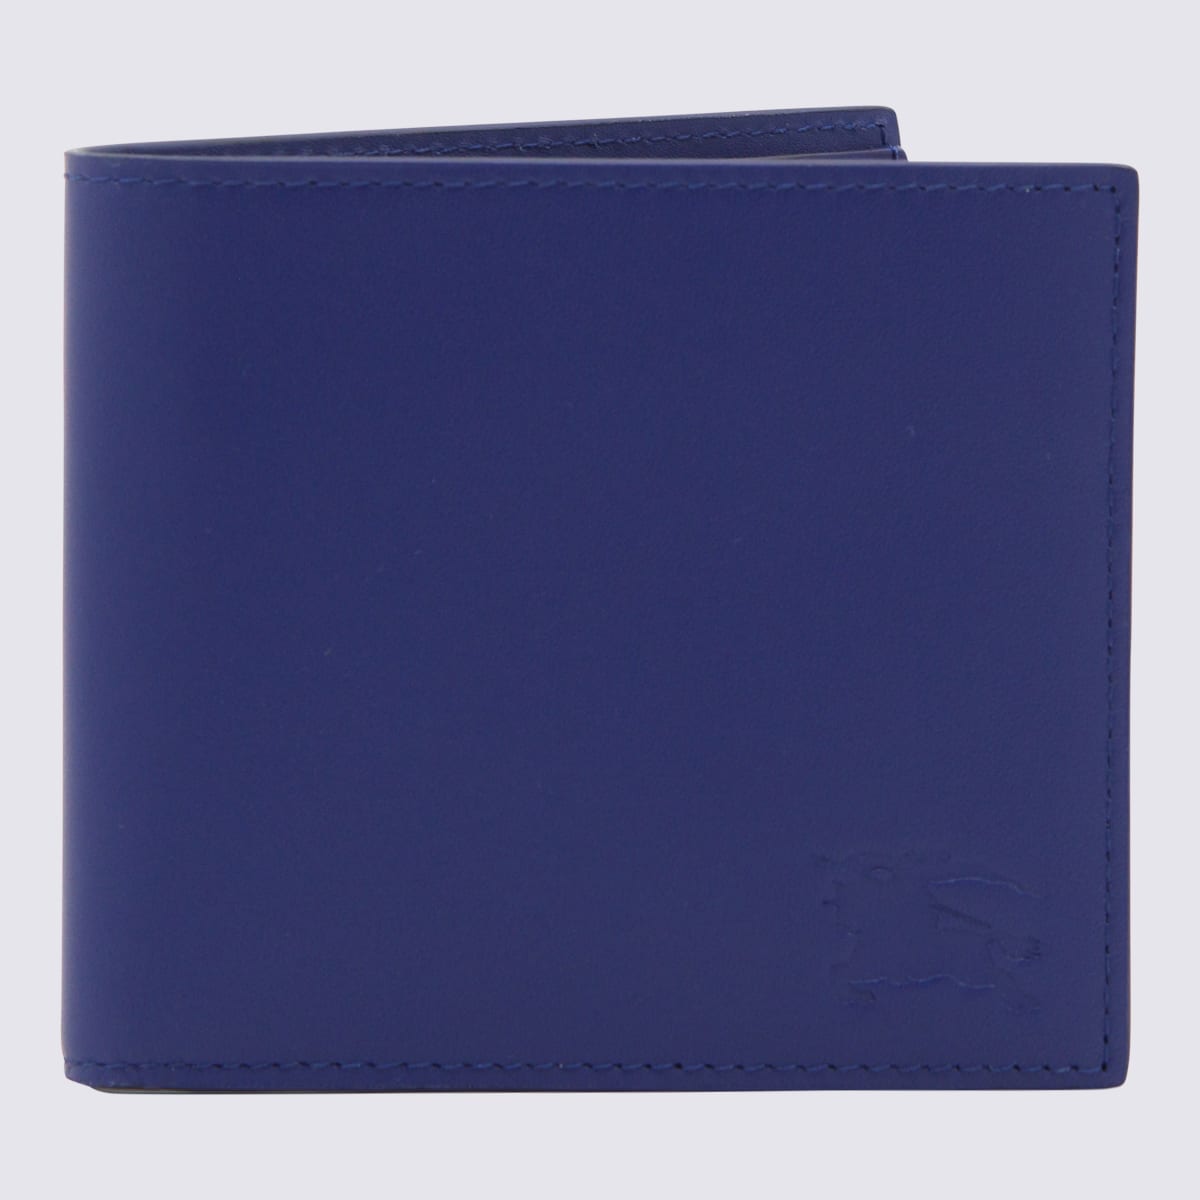 Burberry Blue Leather Equestrian Knight Wallet